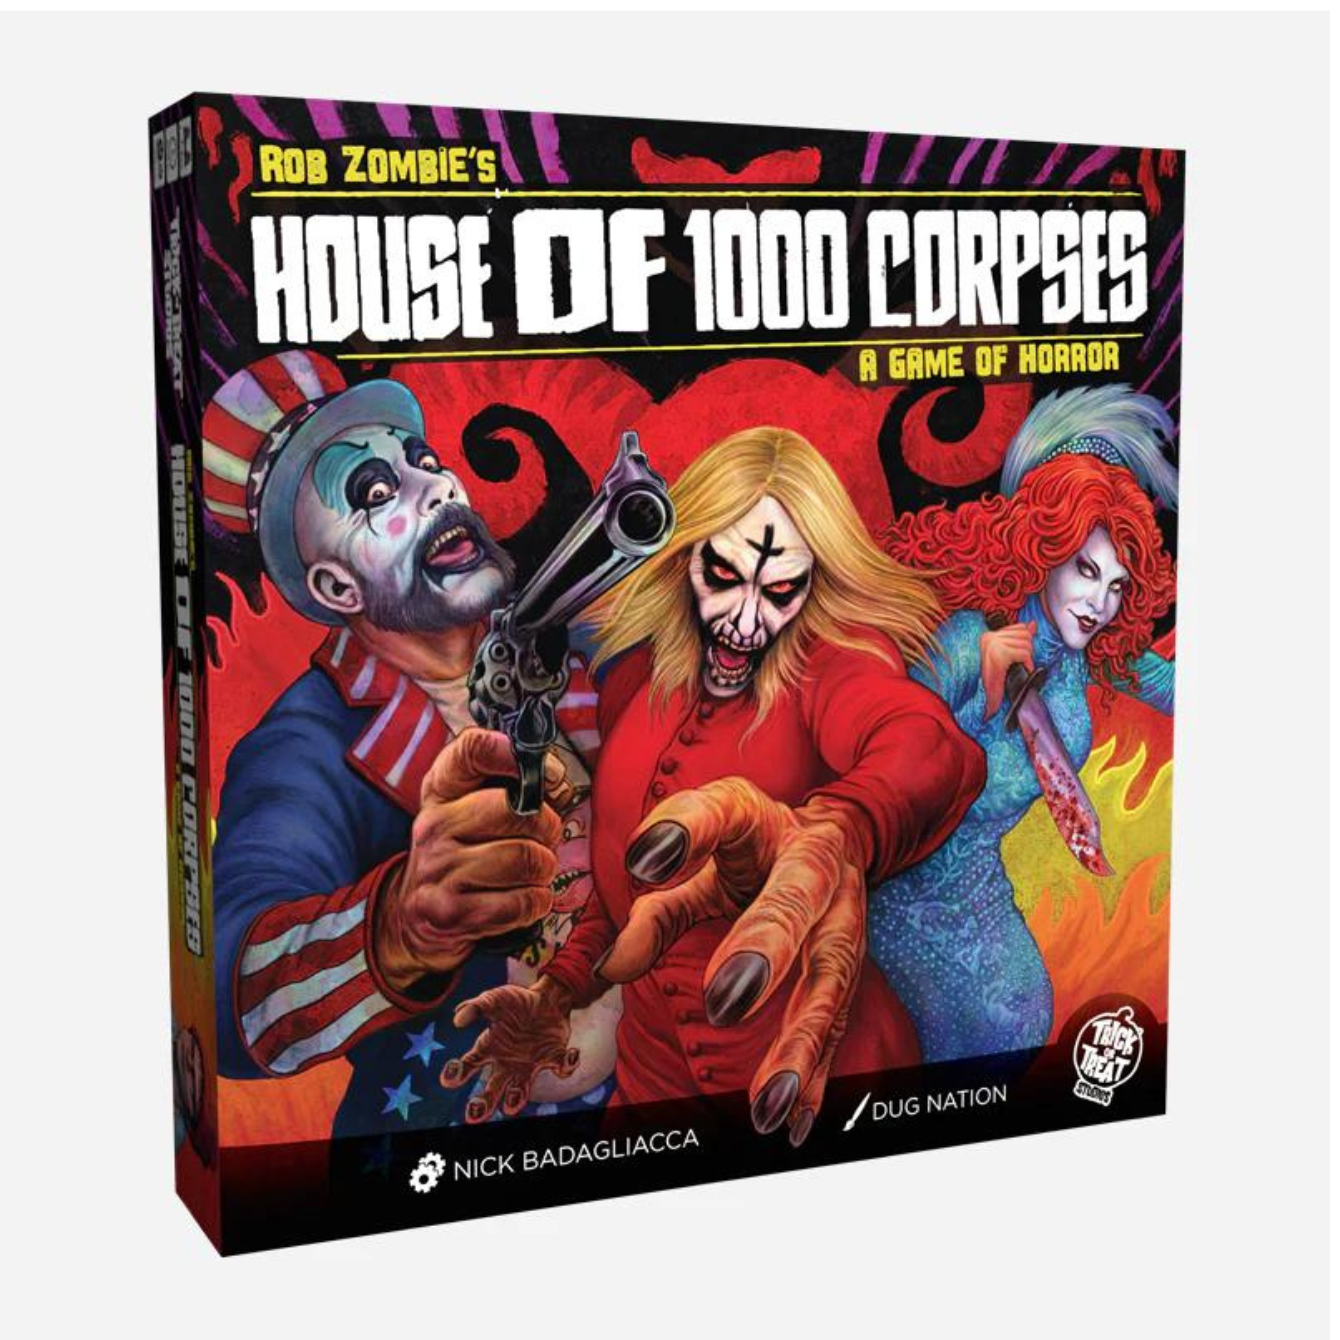 PRE-ORDER HOUSE OF 1000 CORPSES GAME